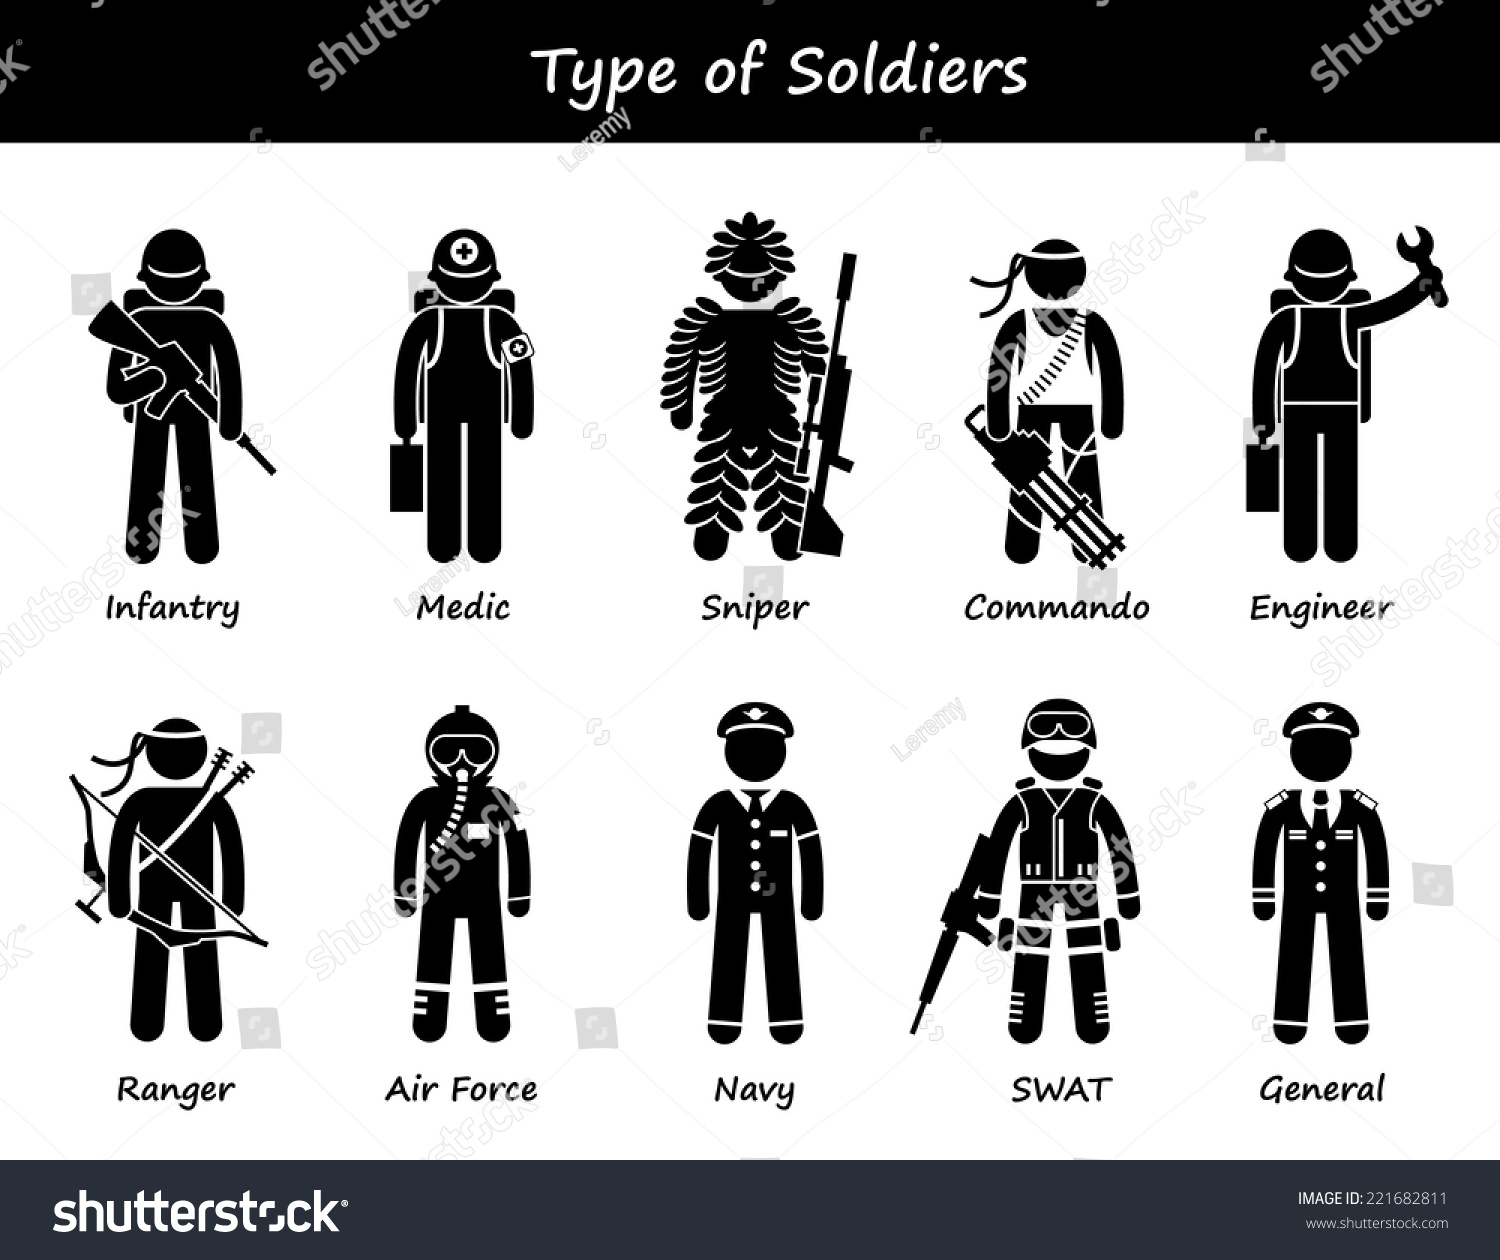 Soldier Types And Class Stick Figure Pictogram Icons Stock Vector ...